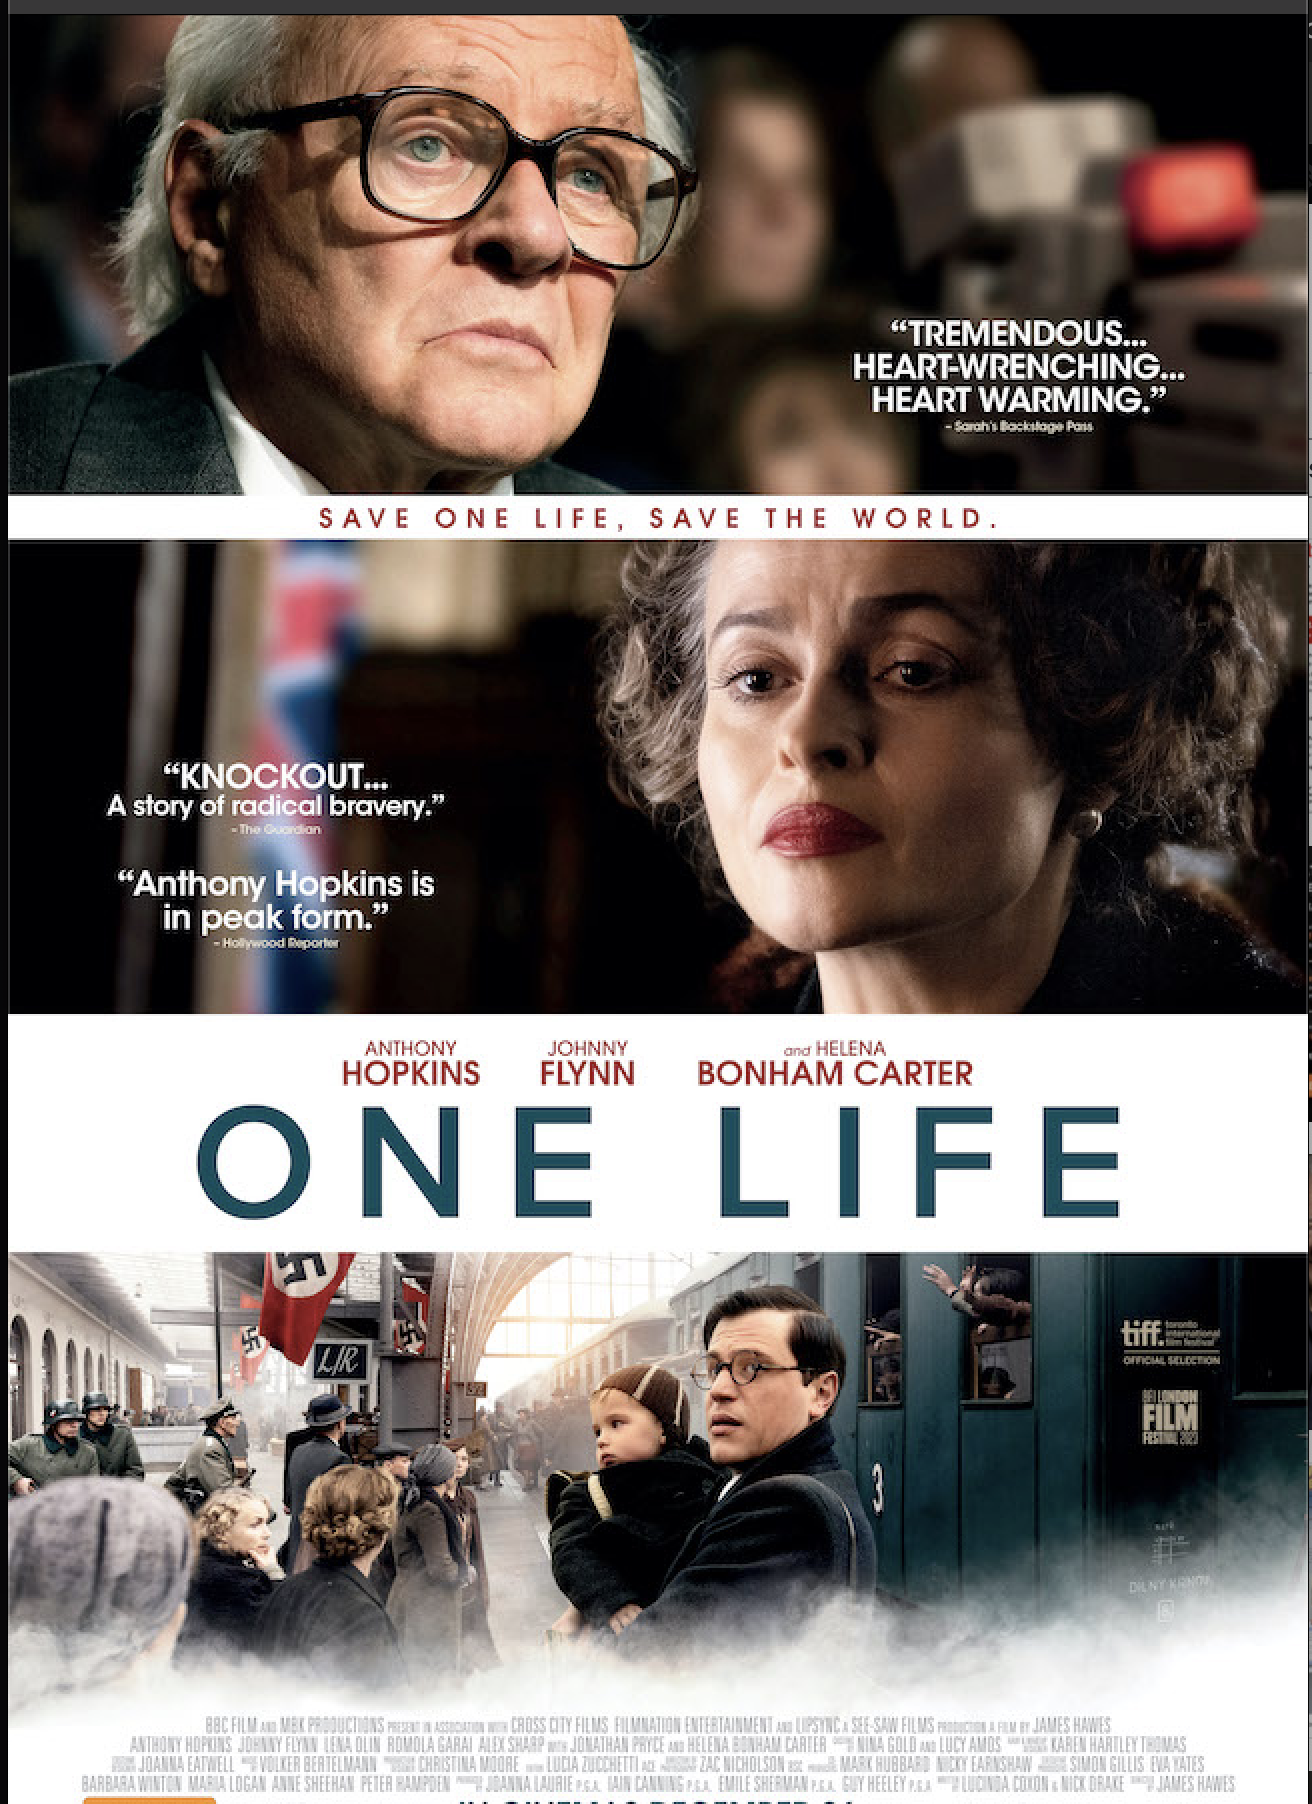 One Life opens across the USA